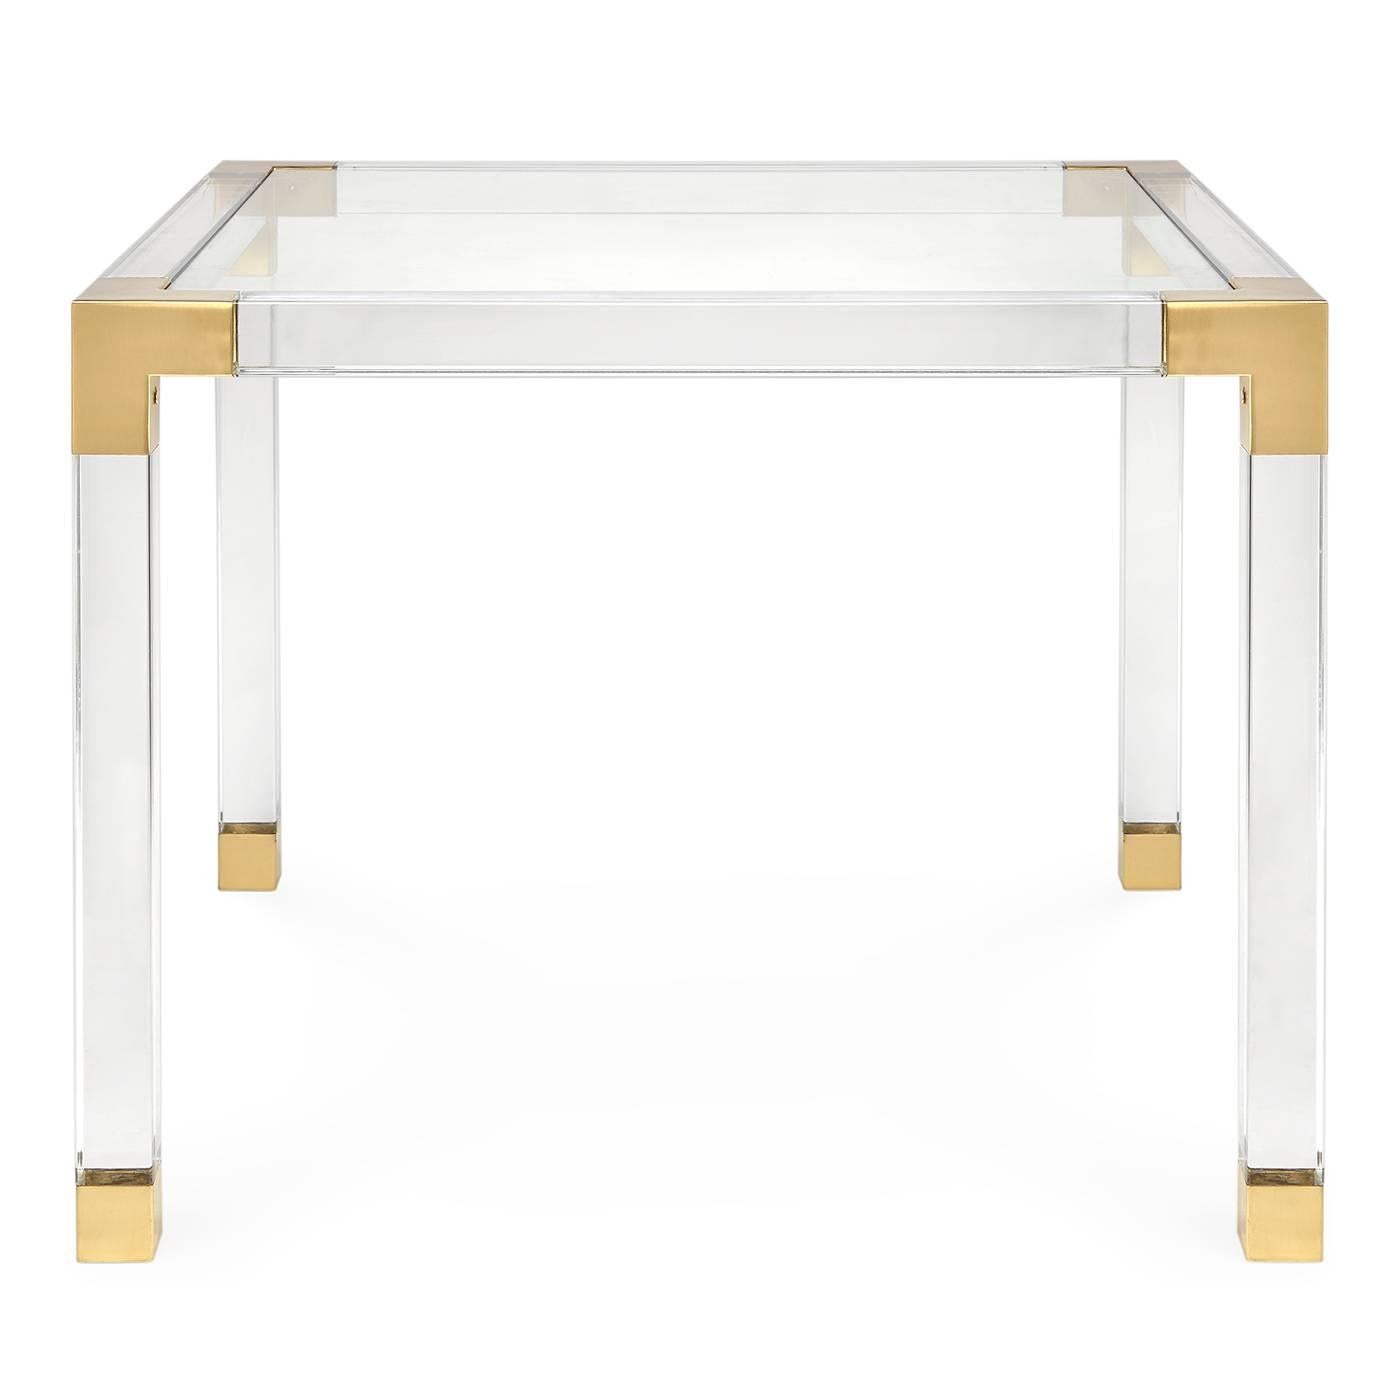 Clearly cool. The perfect blend of simplicity and glamour, modern and traditional. Crystal clear Lucite with brushed brass corners. Nothing finishes a room like a game table in a corner with a chandelier swaged over the top. Also doubles as a petite